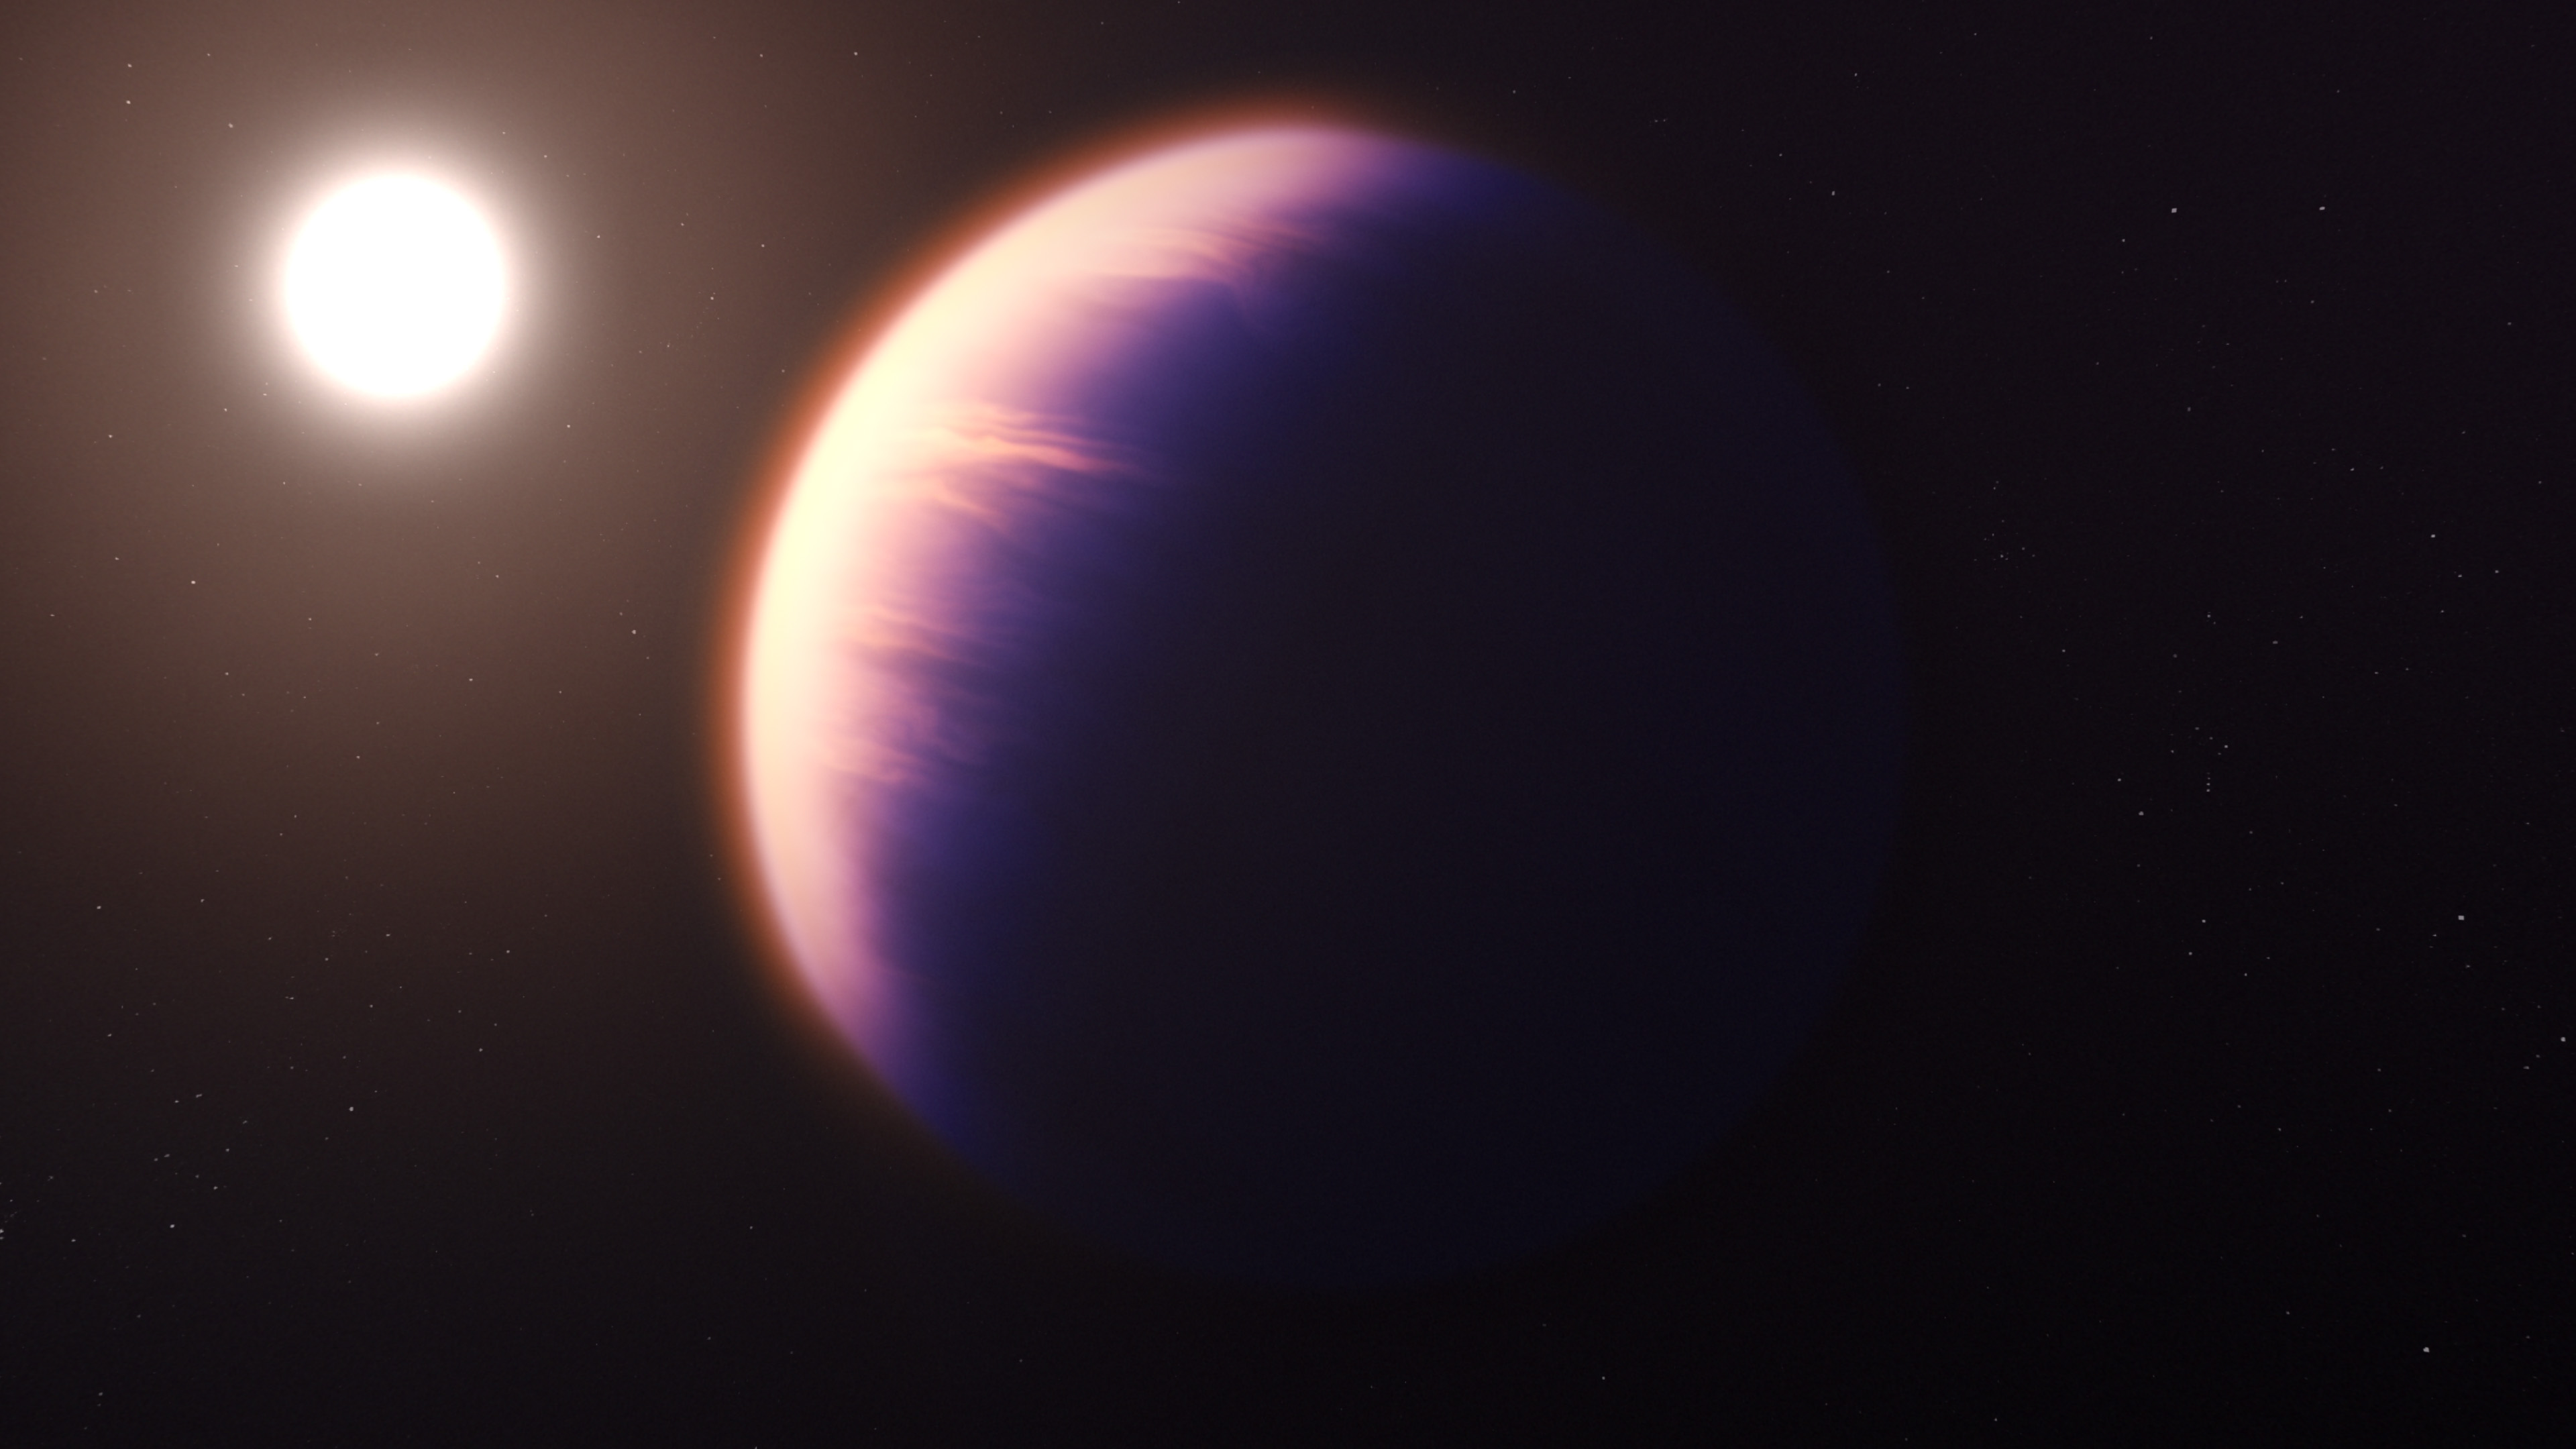 This illustration shows what exoplanet WASP-39 b could look like, based on current understanding of the planet.&nbsp;Data collected by JWST’s Near-Infrared Spectrograph (NIRSpec) shows unambiguous evidence for carbon dioxide in the atmosphere, while previous observations from NASA’s Hubble and Spitzer Space Telescopes, as well as other telescopes, indicate the presence of water vapor, sodium, and potassium. The planet probably has clouds and some form of weather, but it may not have atmospheric bands like those of Jupiter and Saturn.This illustration is based on indirect transit observations from JWST as well as other space and ground-based telescopes. JWST has not captured a direct image of this planet